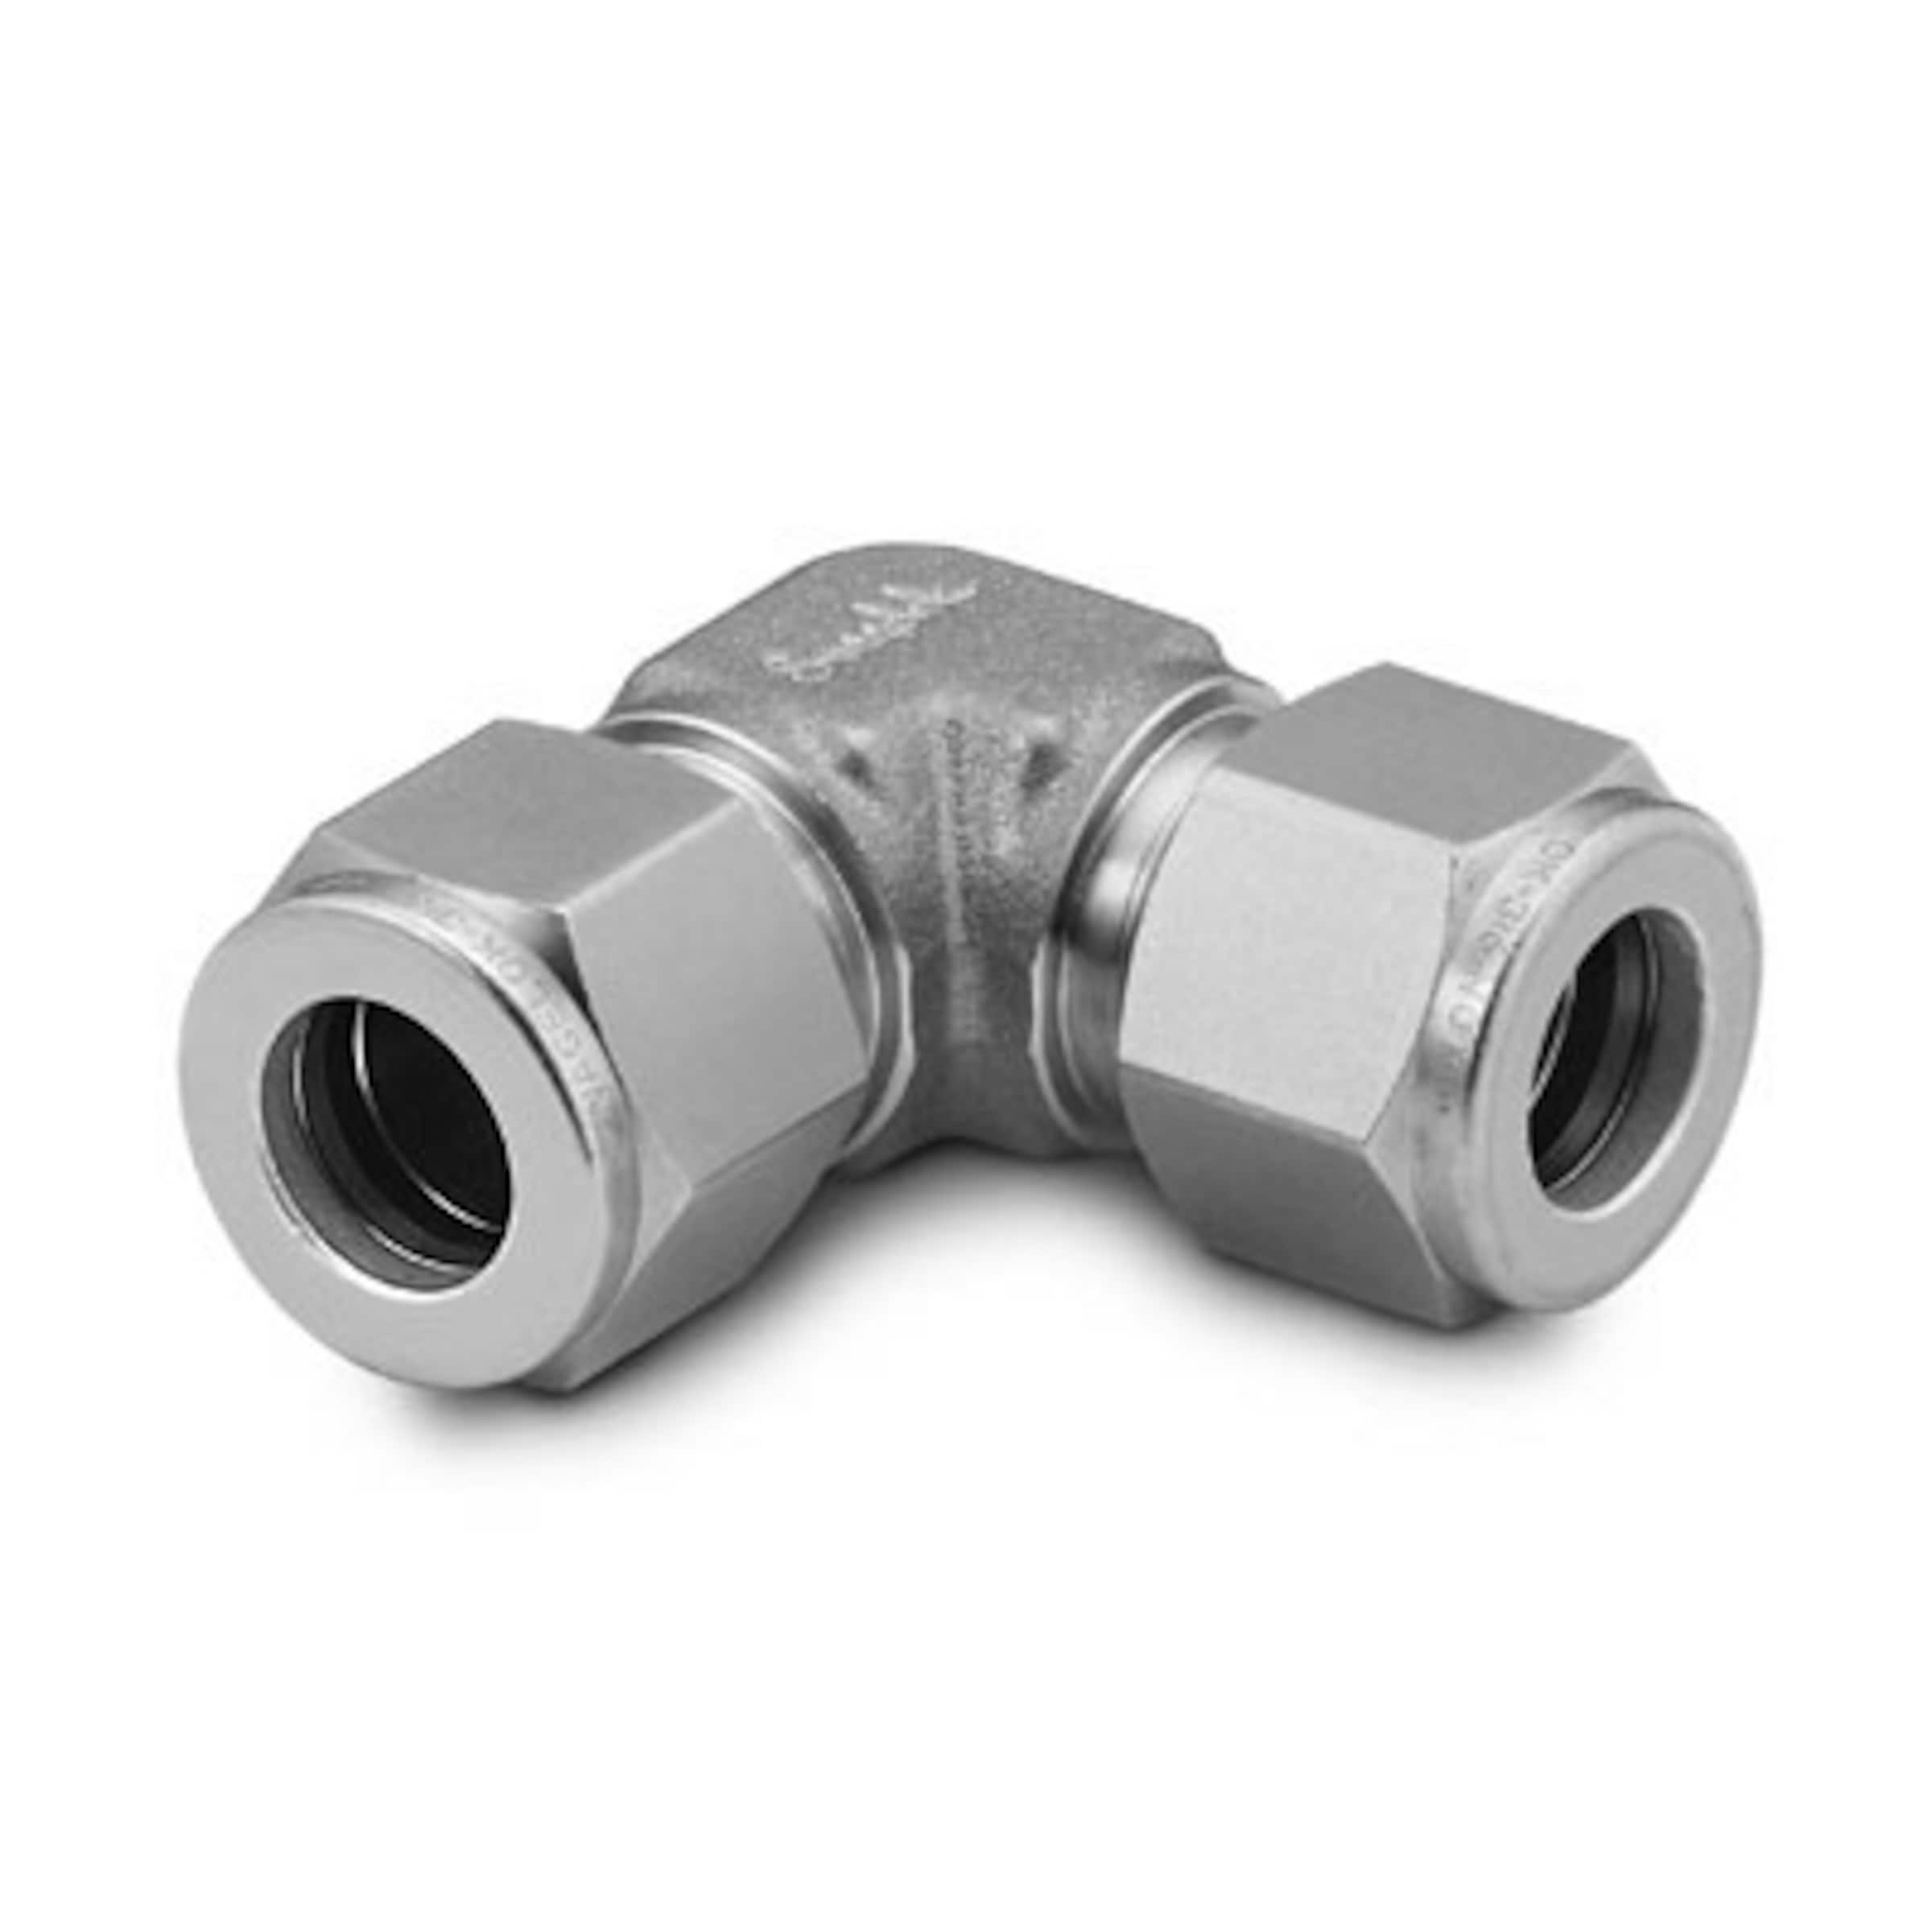 Stainless Steel Swagelok Tube Fitting, Union Elbow, 3/4 in. Tube OD, Unions, Tube Fittings and Adapters, Fittings, All Products